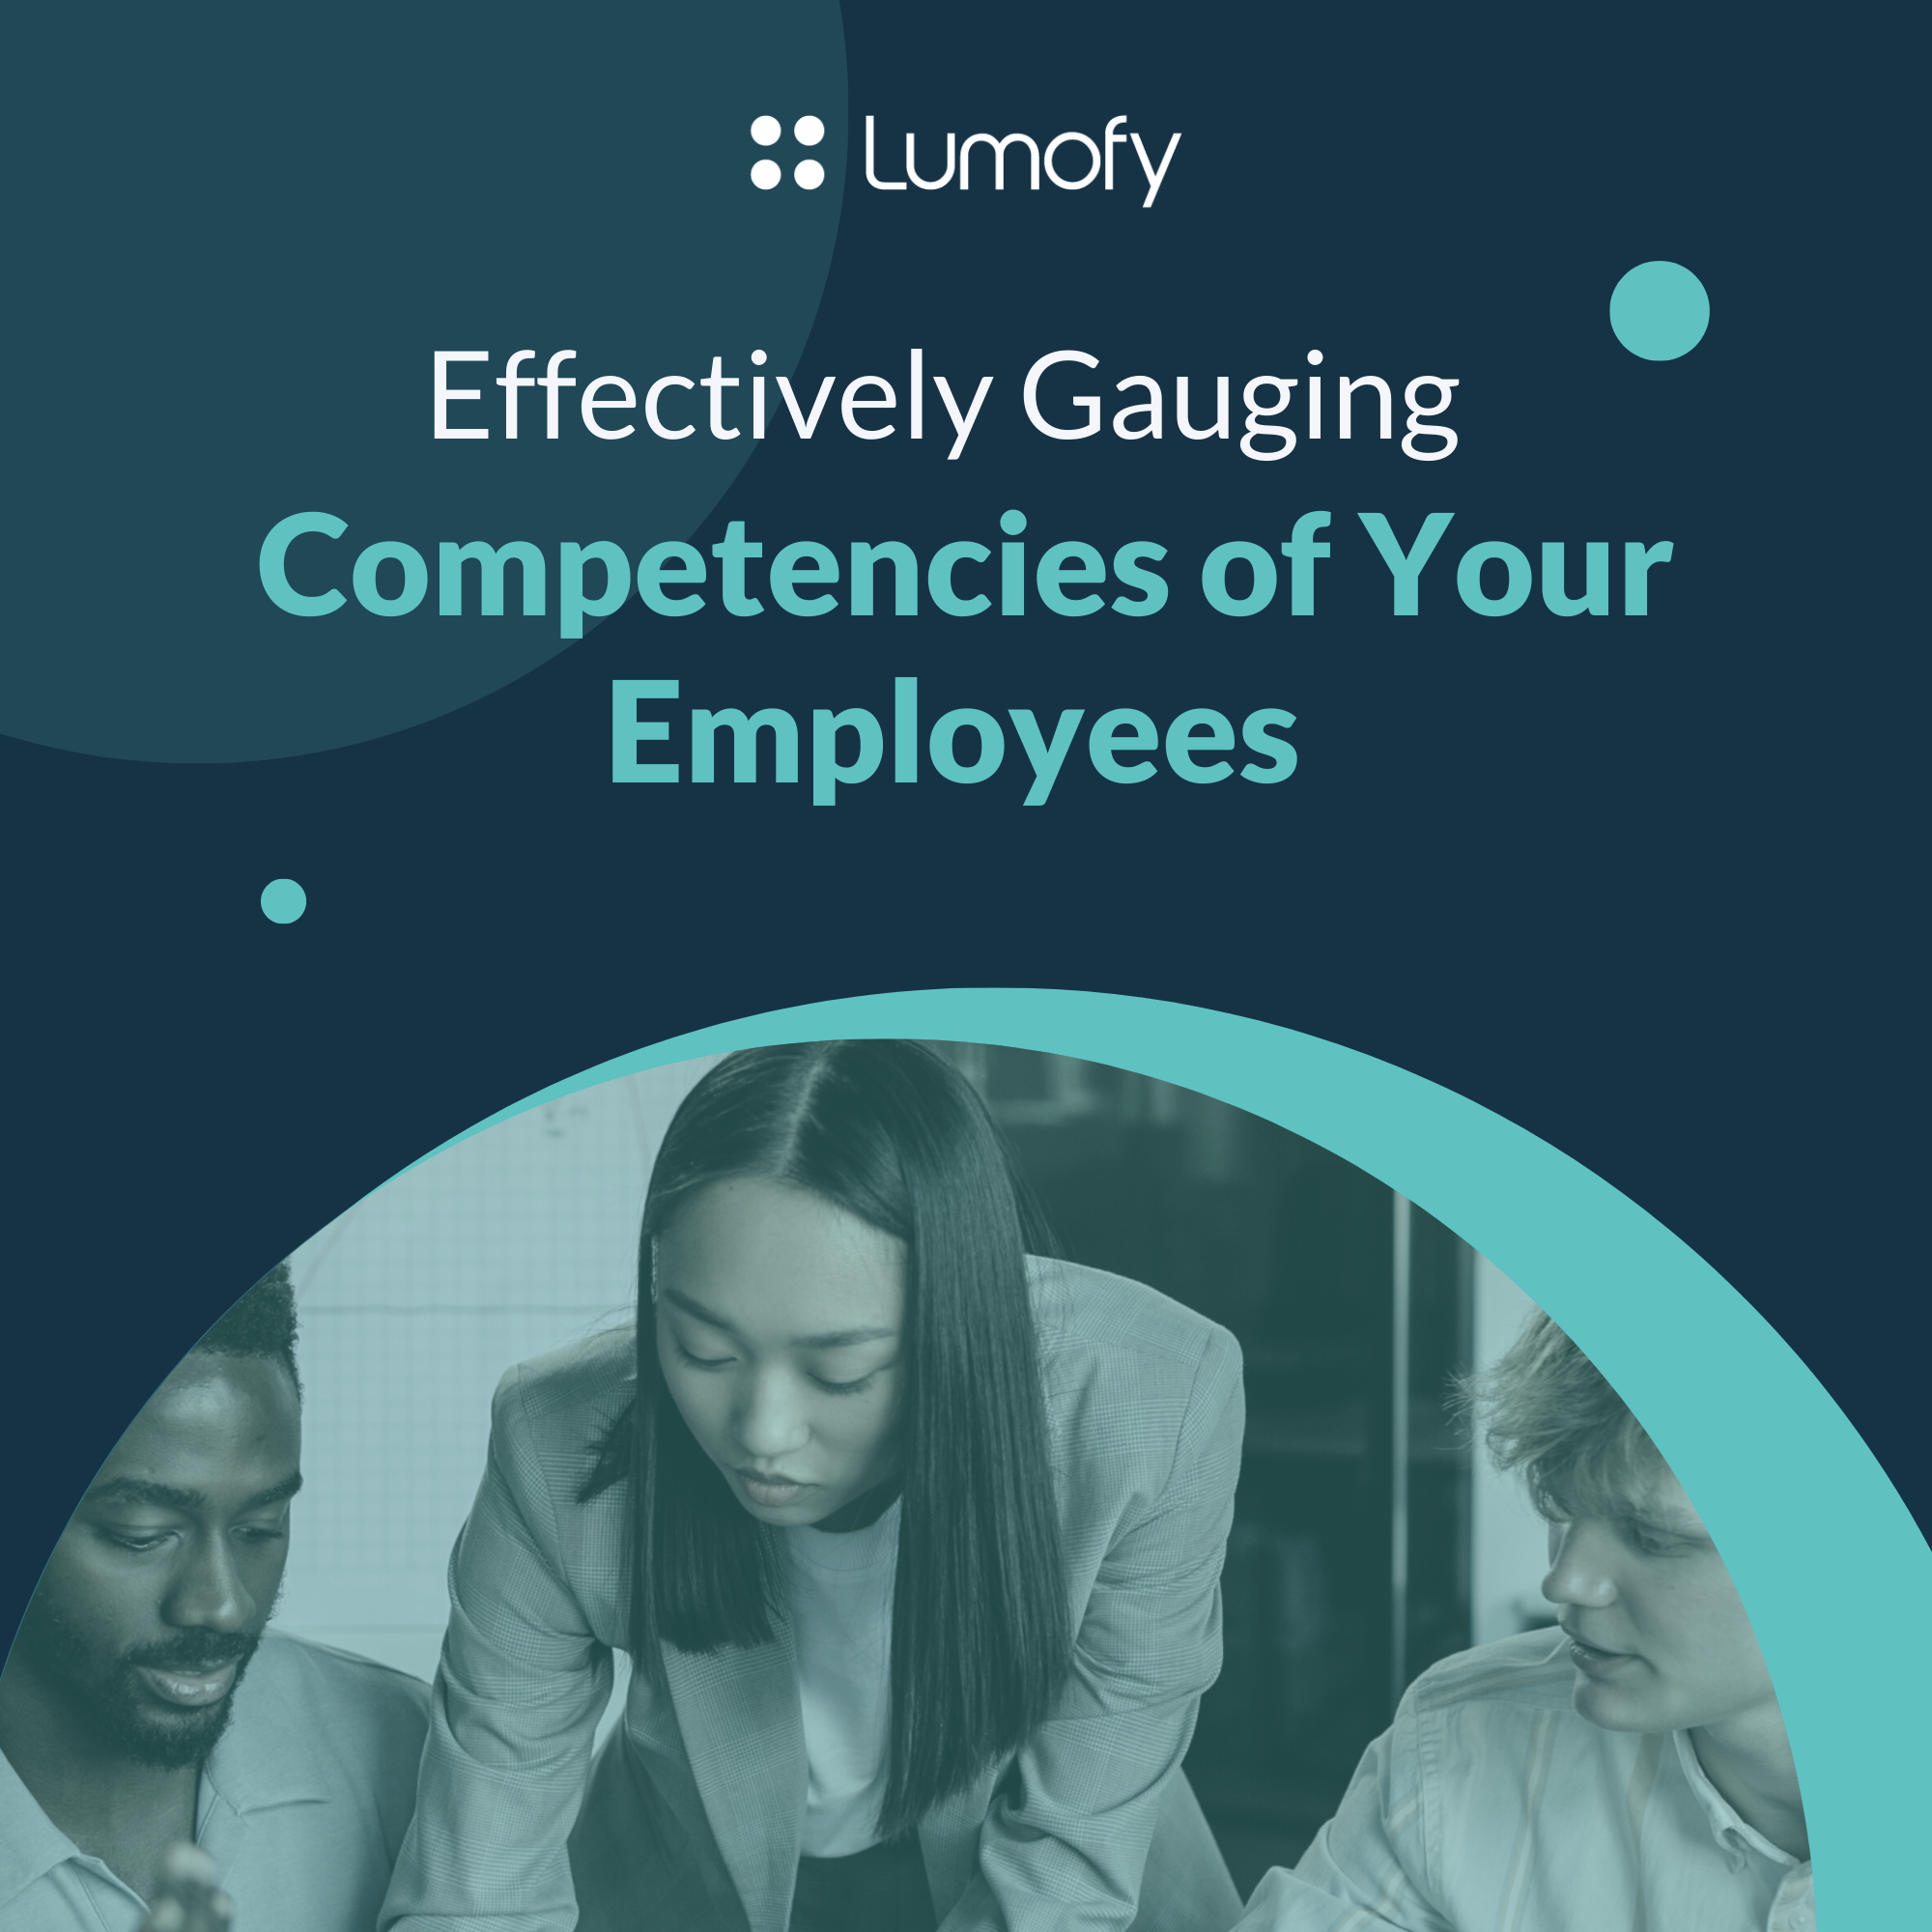 Effectively Gauging Competencies of Your Employees